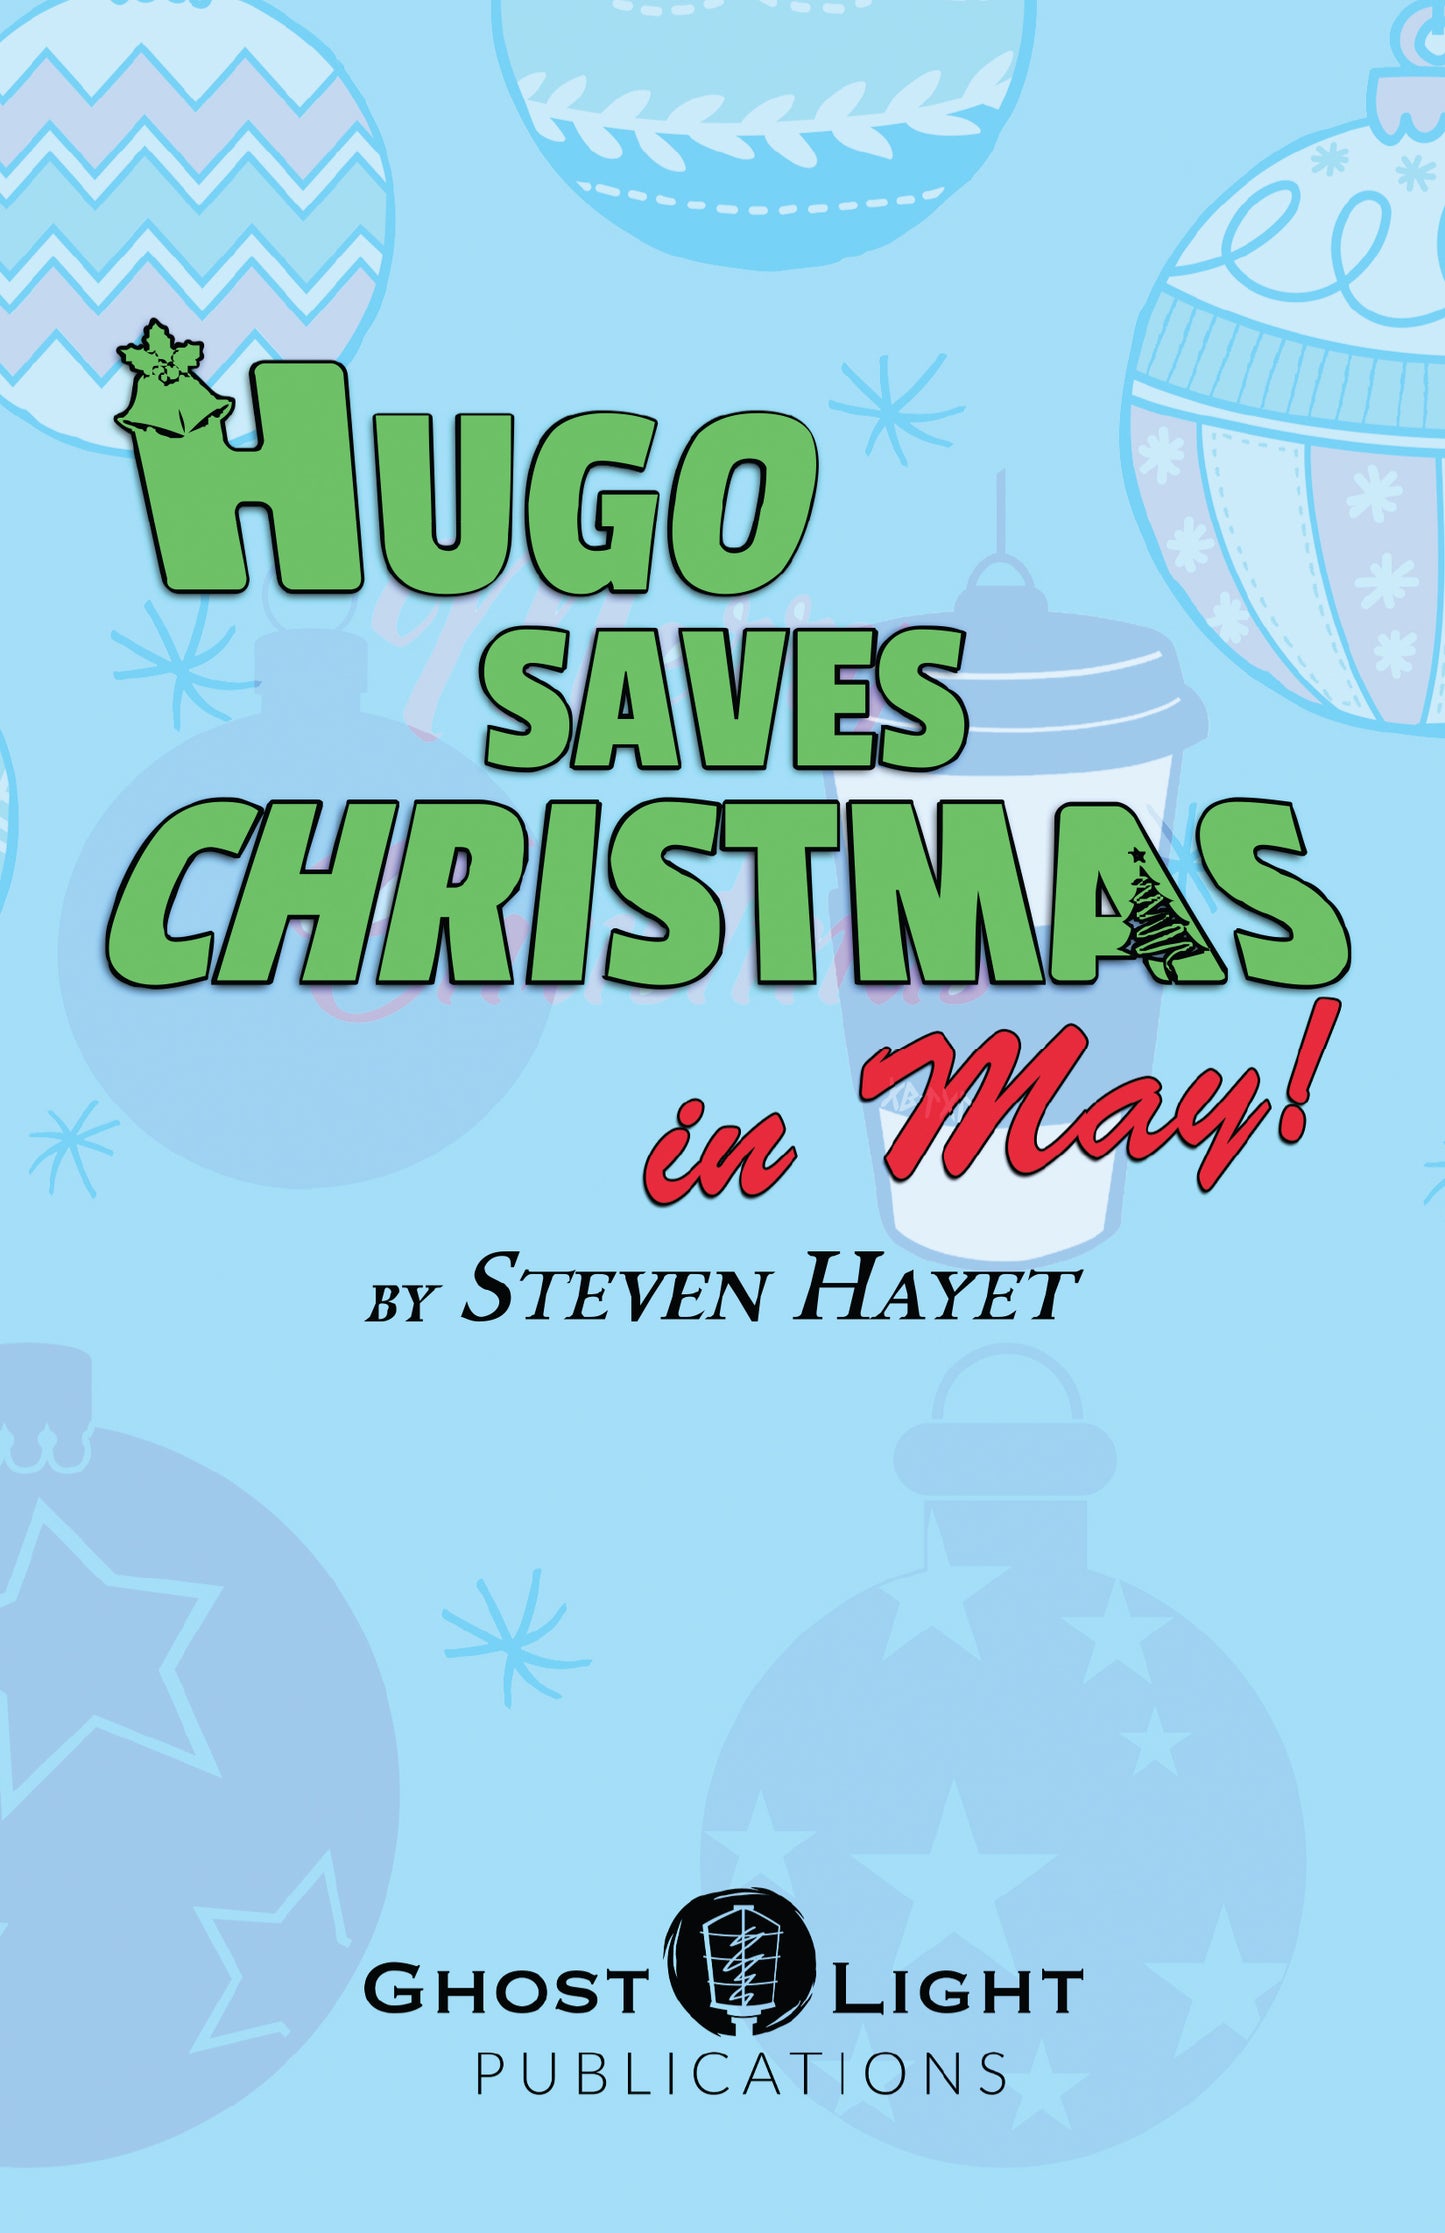 HUGO SAVES CHRISTMAS...IN MAY by Steven Hayet